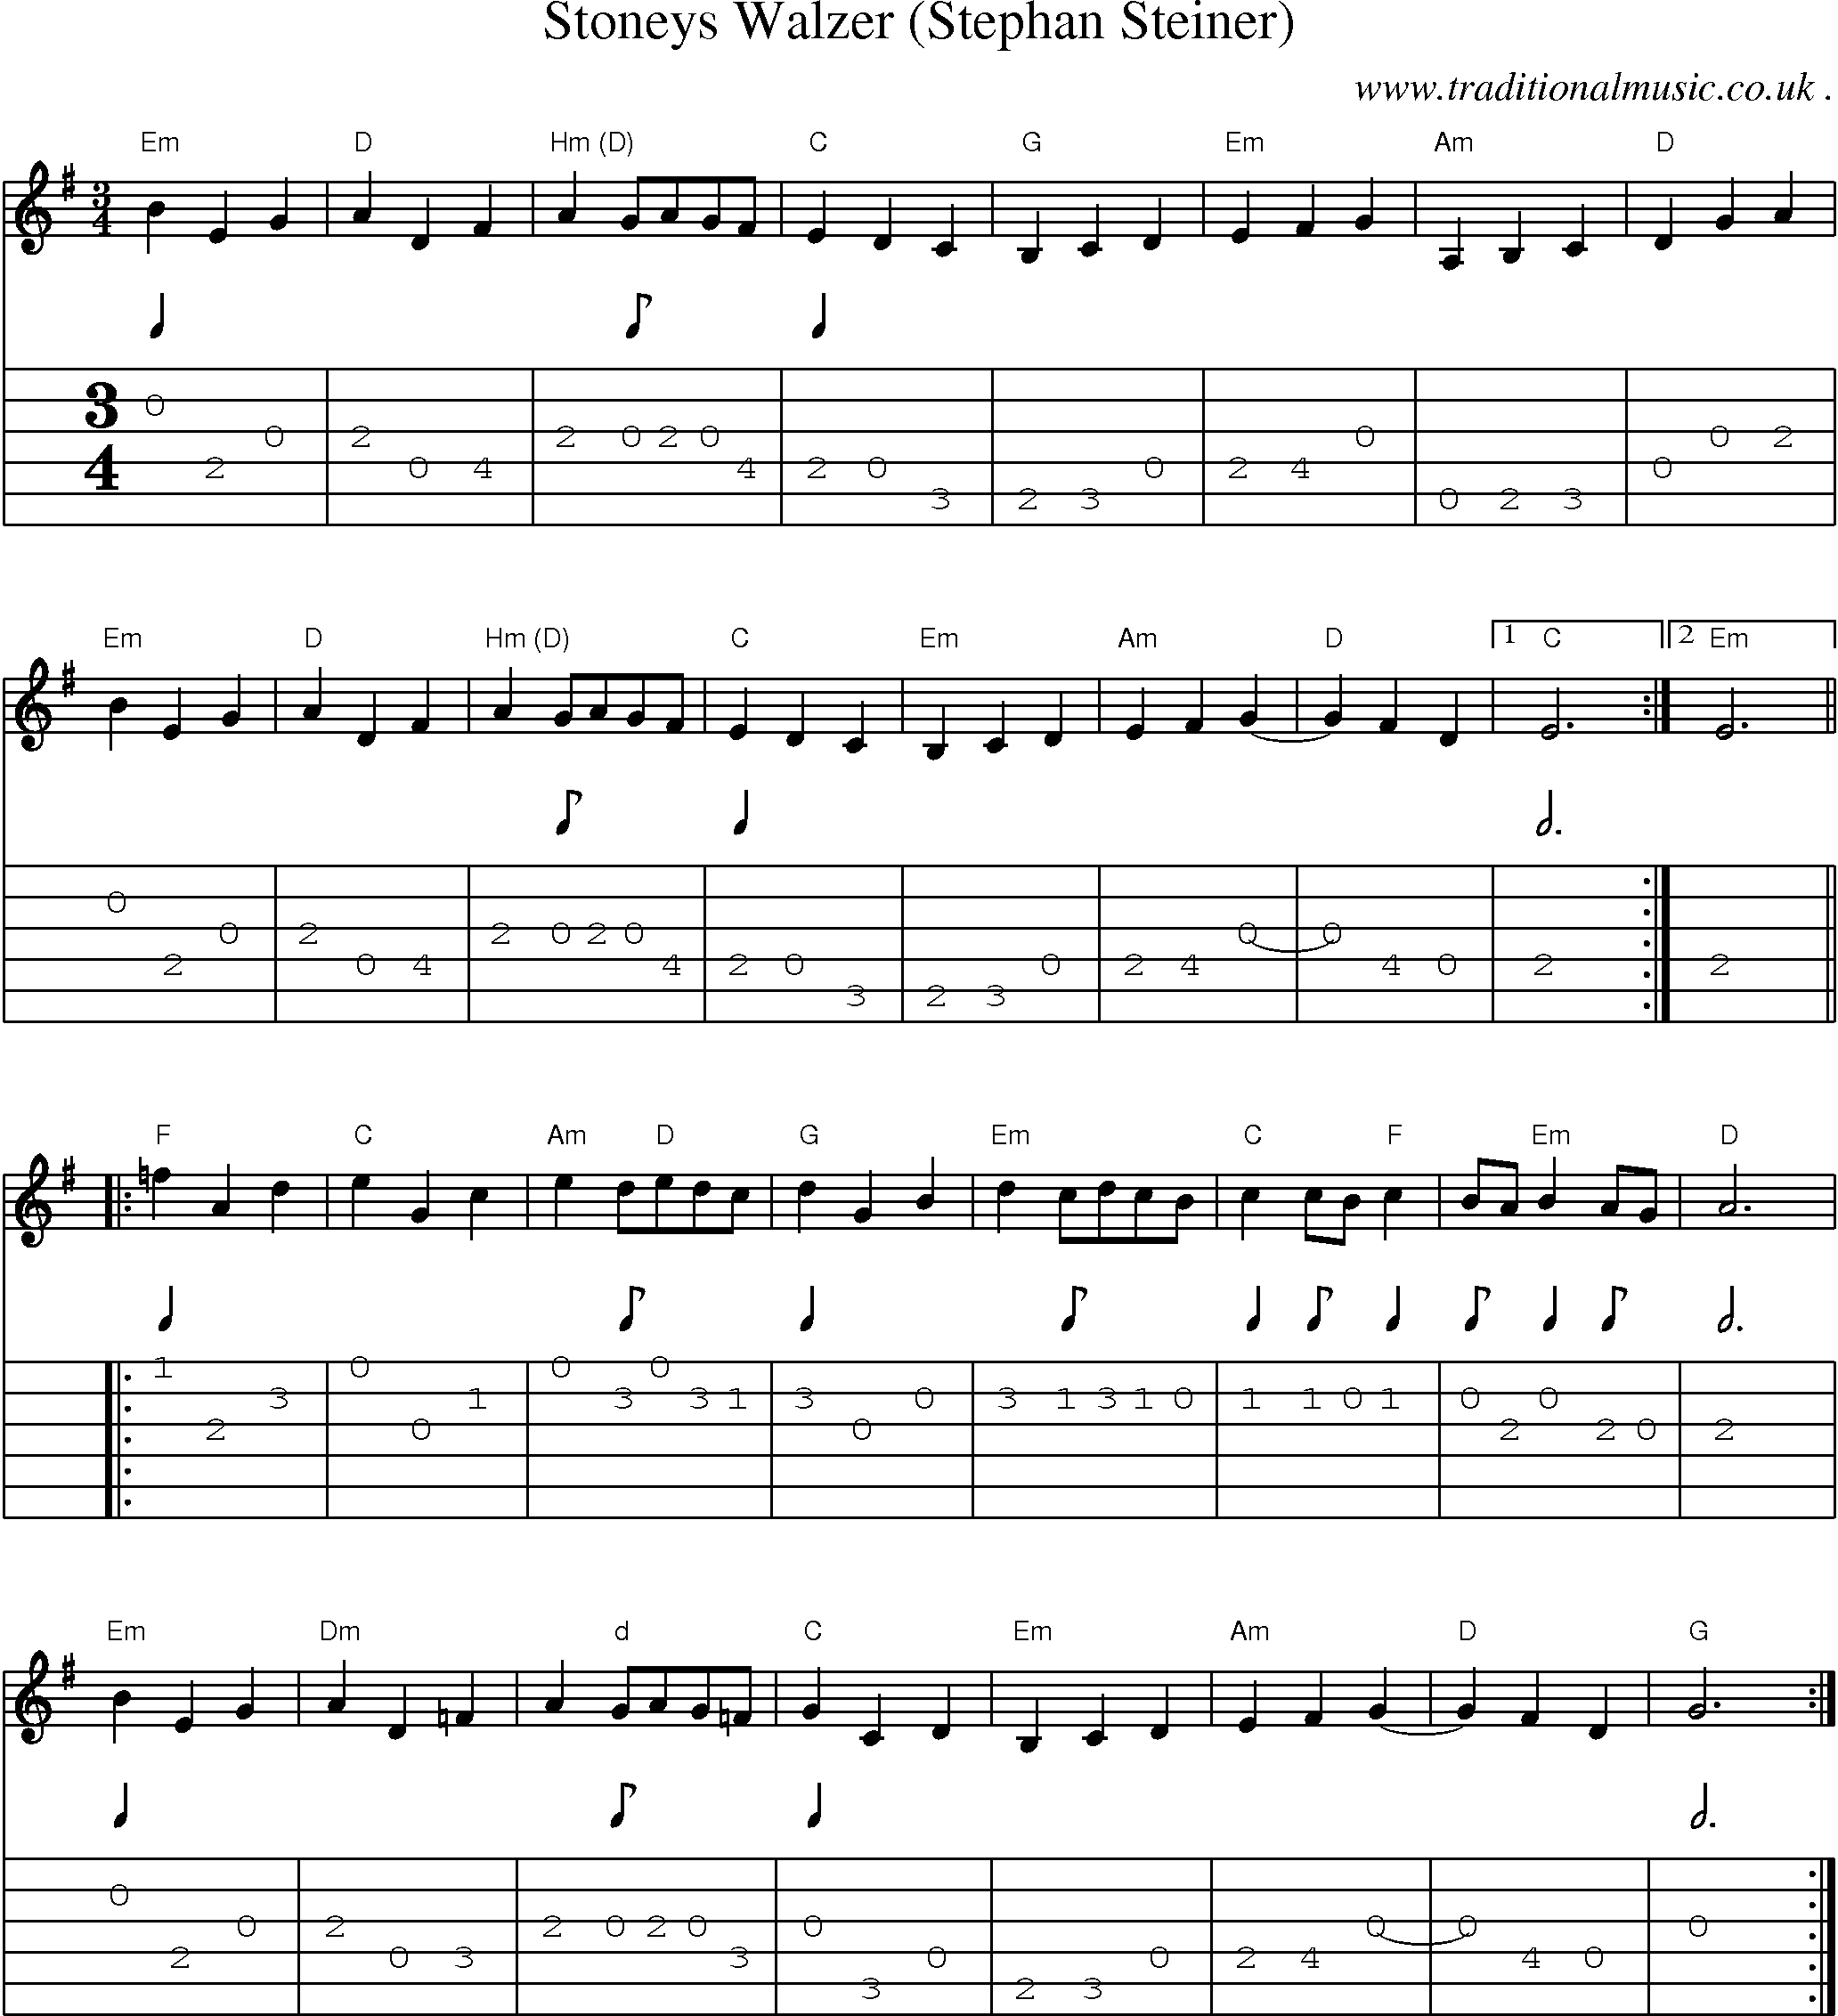 Sheet-Music and Guitar Tabs for Stoneys Walzer (stephan Steiner)